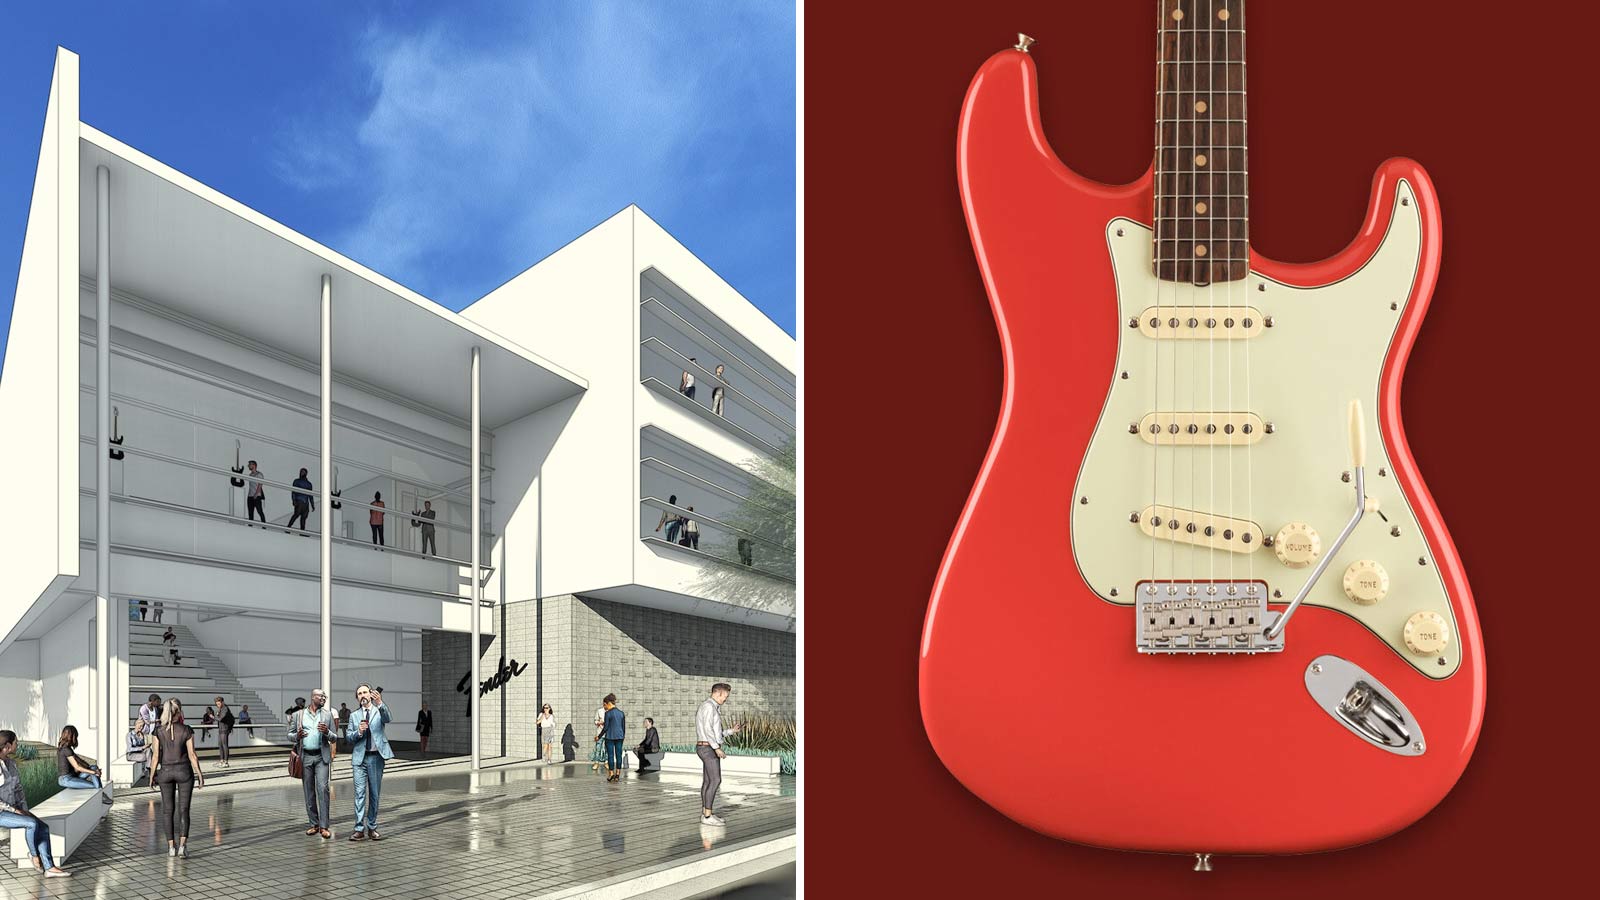 Iconic guitar maker Fender moving headquarters to former Paradise Valley Mall site in Phoenix